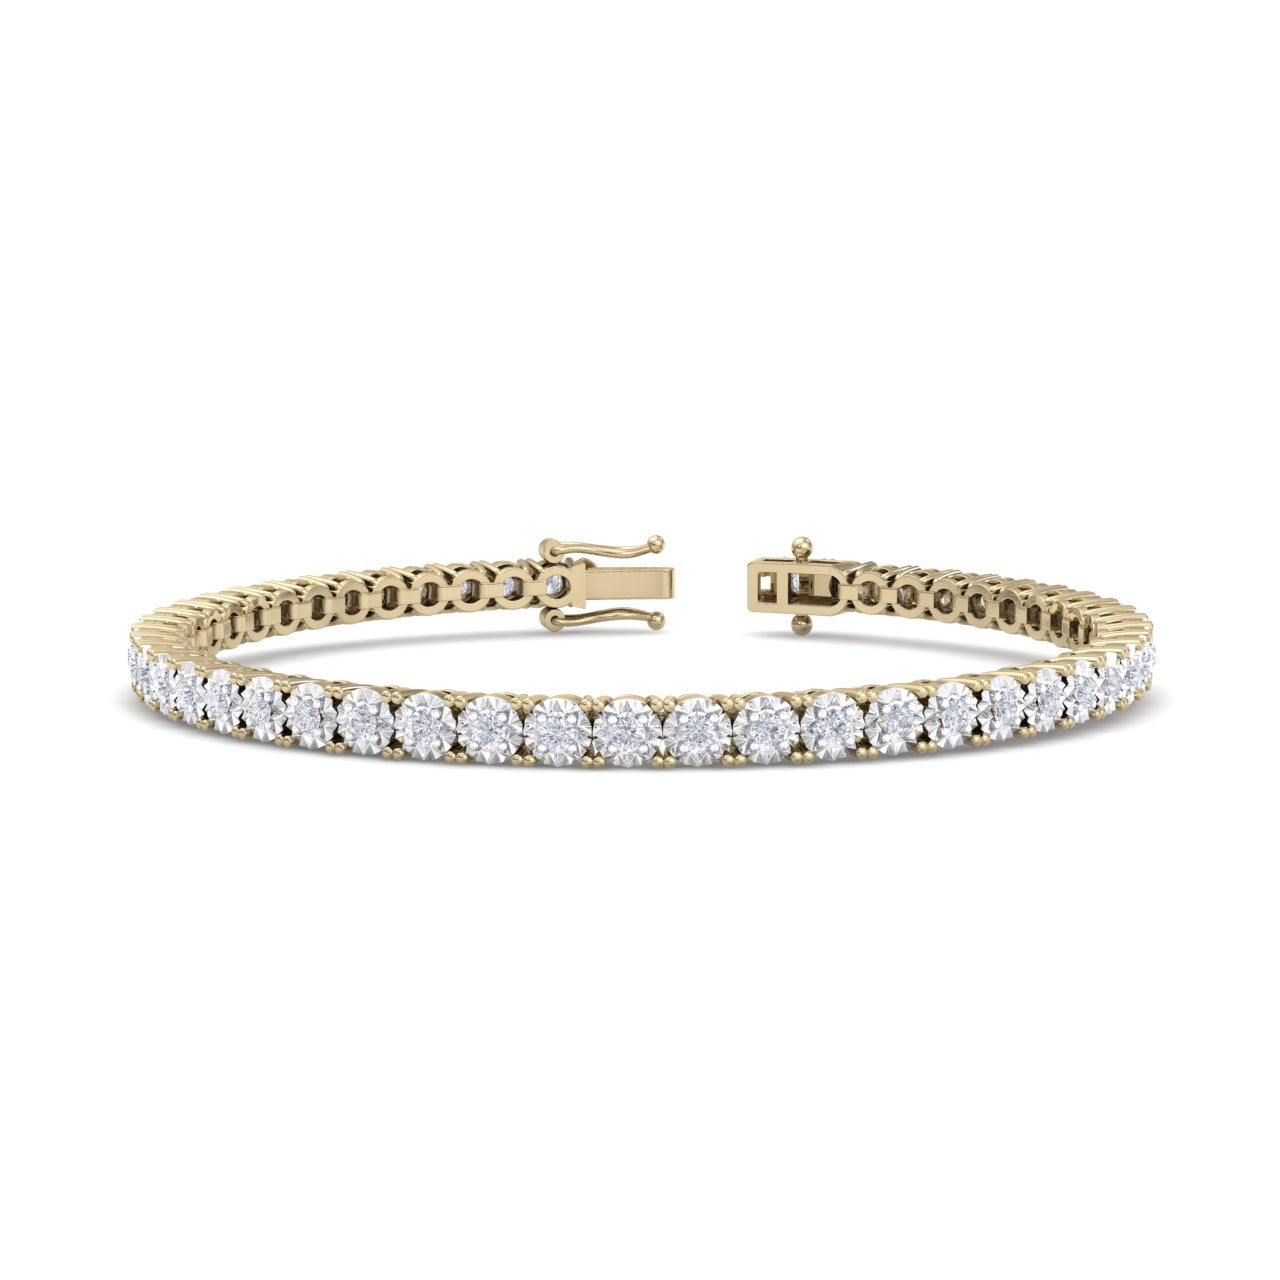 Tennis bracelet in yellow gold with white diamonds of 1.35 ct in weight